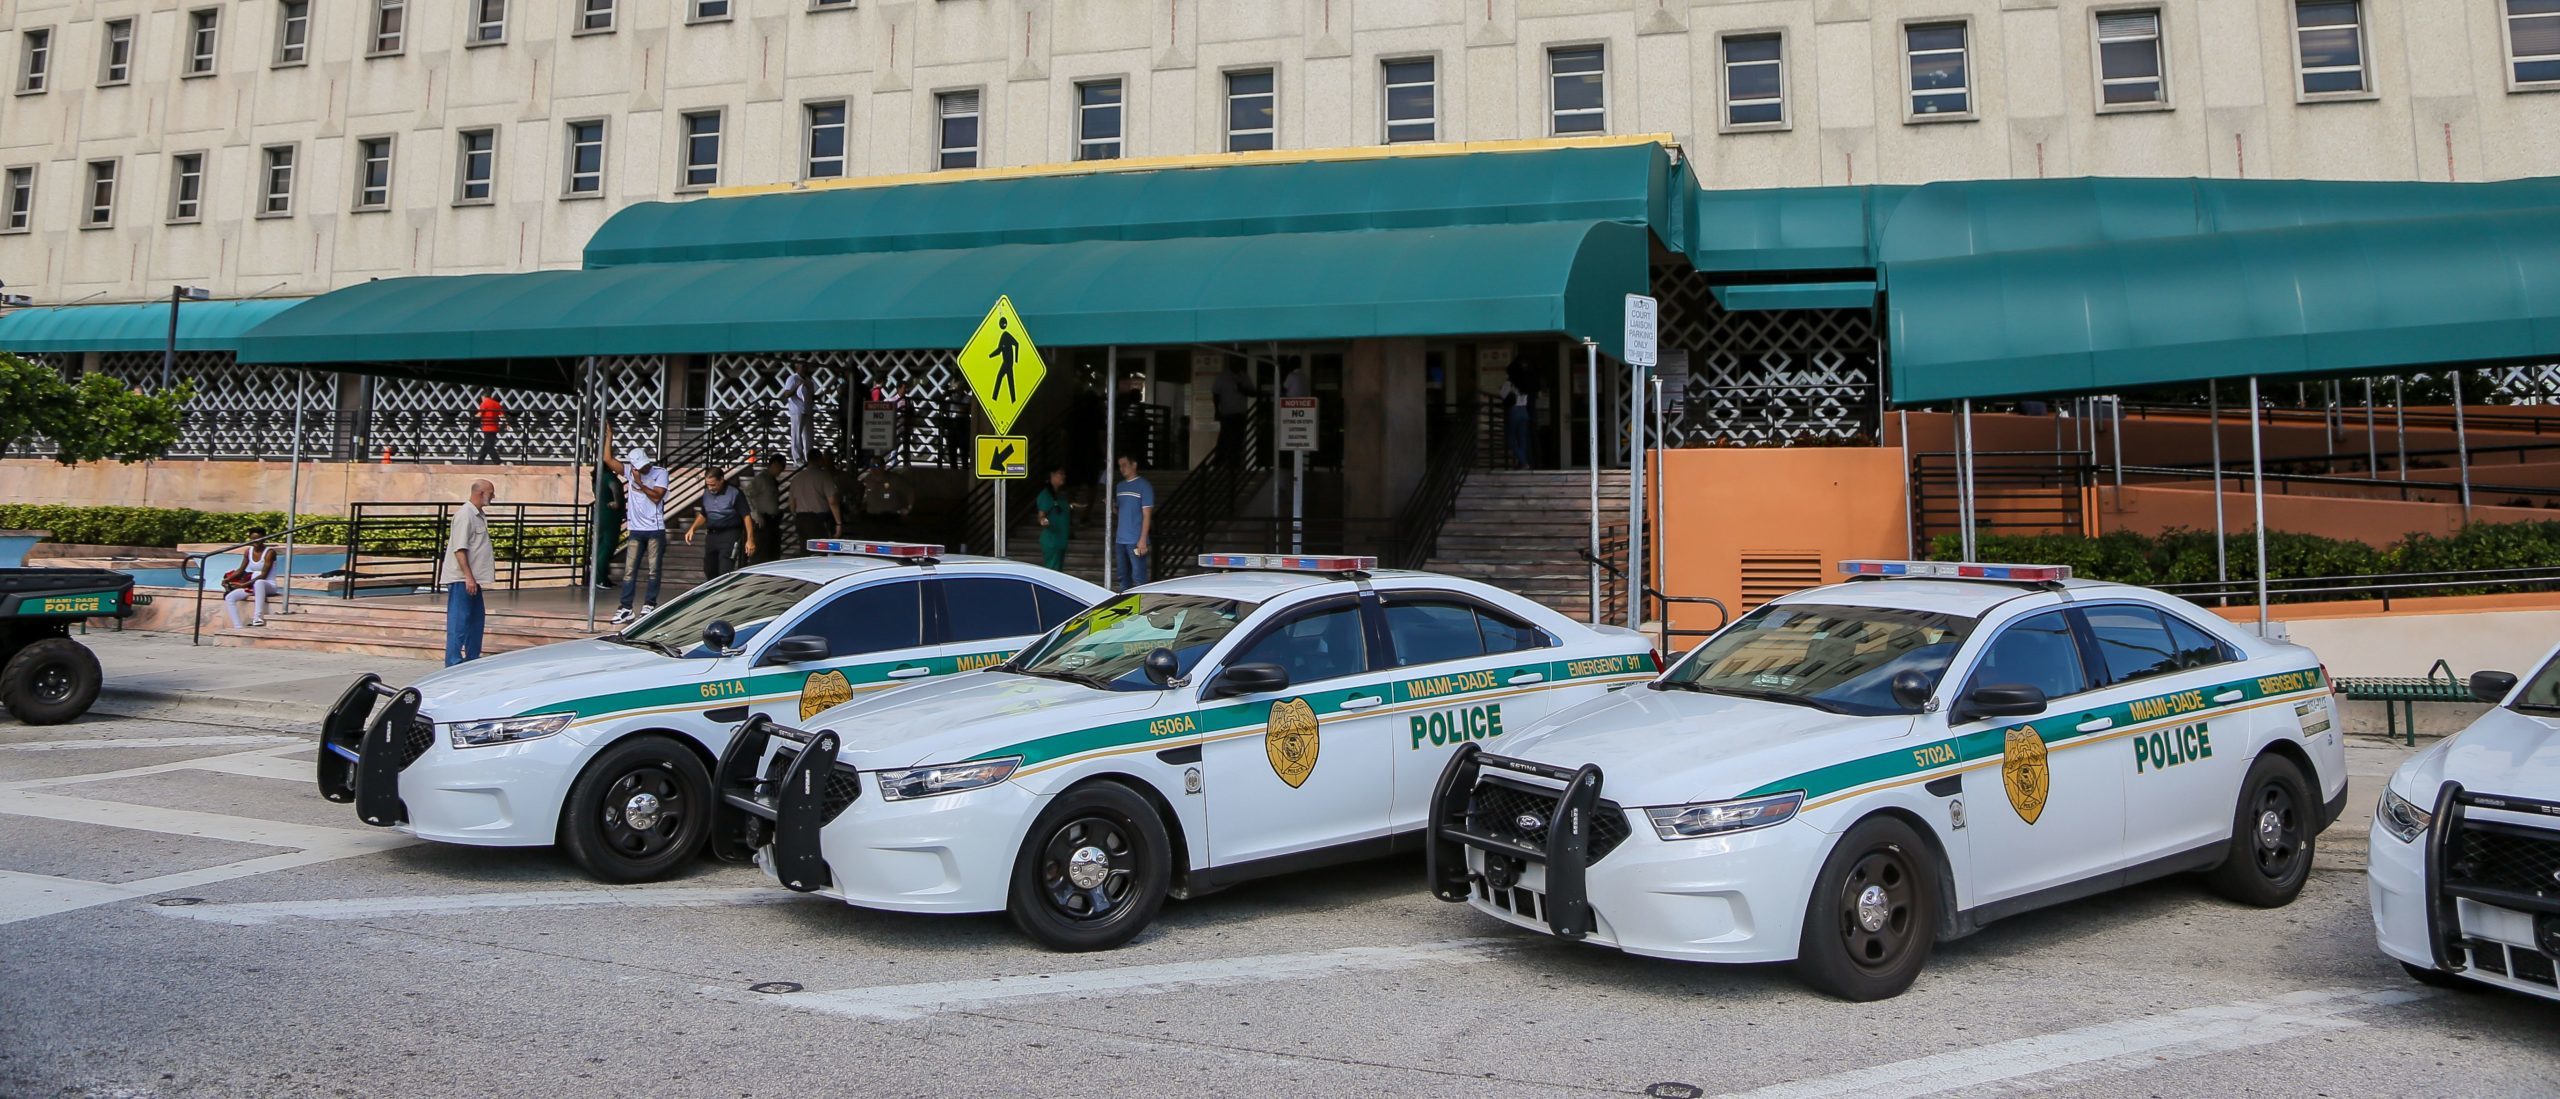 Police cars are seen outside the Miami-Dade County courthouse in Miami, Florida on November 8, 2019. (Photo by Zak BENNETT / AFP) (Photo by ZAK BENNETT/AFP via Getty Images)